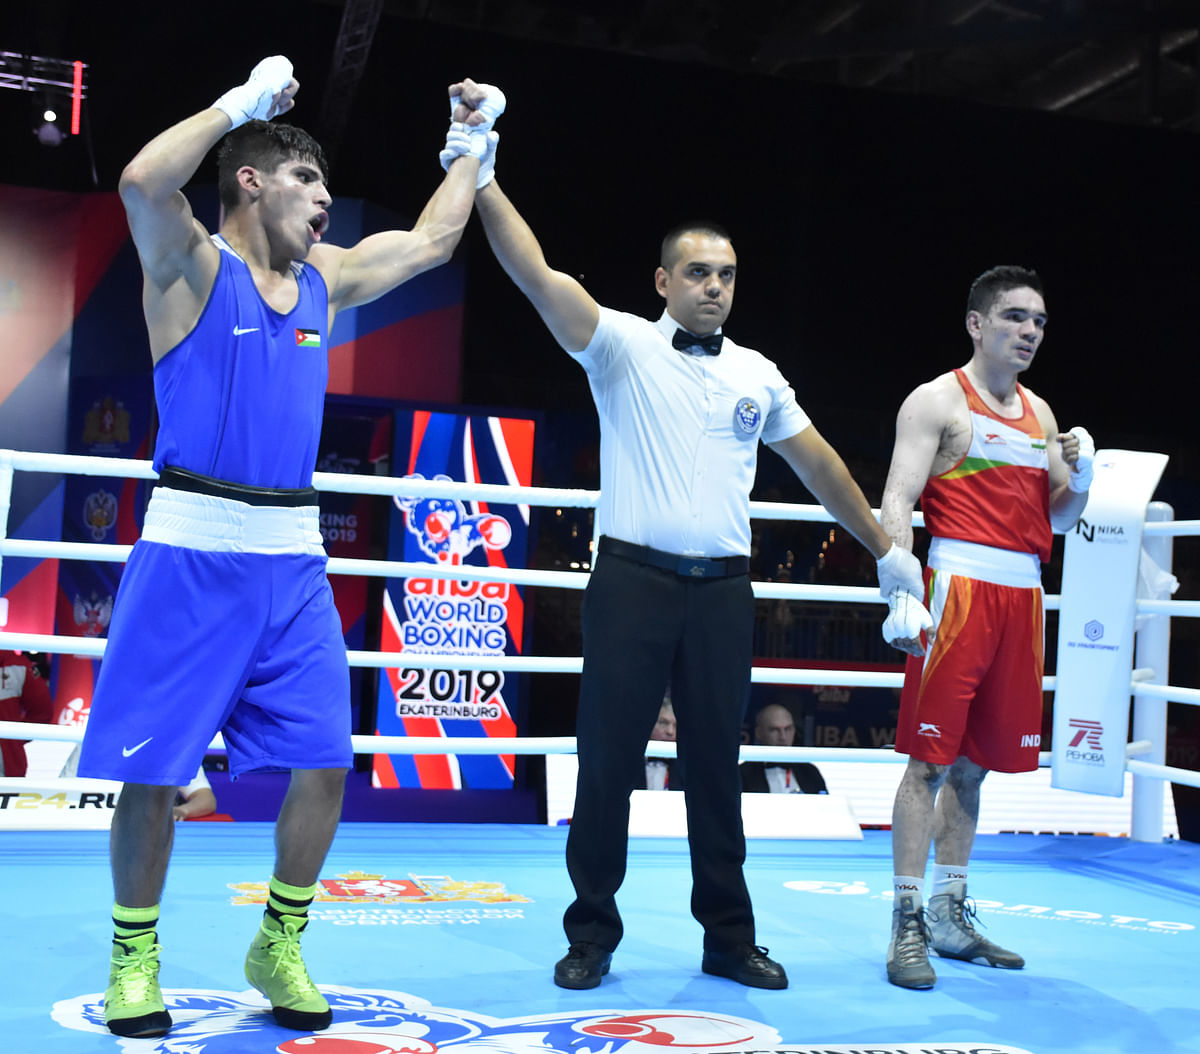 Duryodhan Singh Negi lost to Jordan’s Zeyad Eashash in the second round of the World Men’s Boxing Championship.